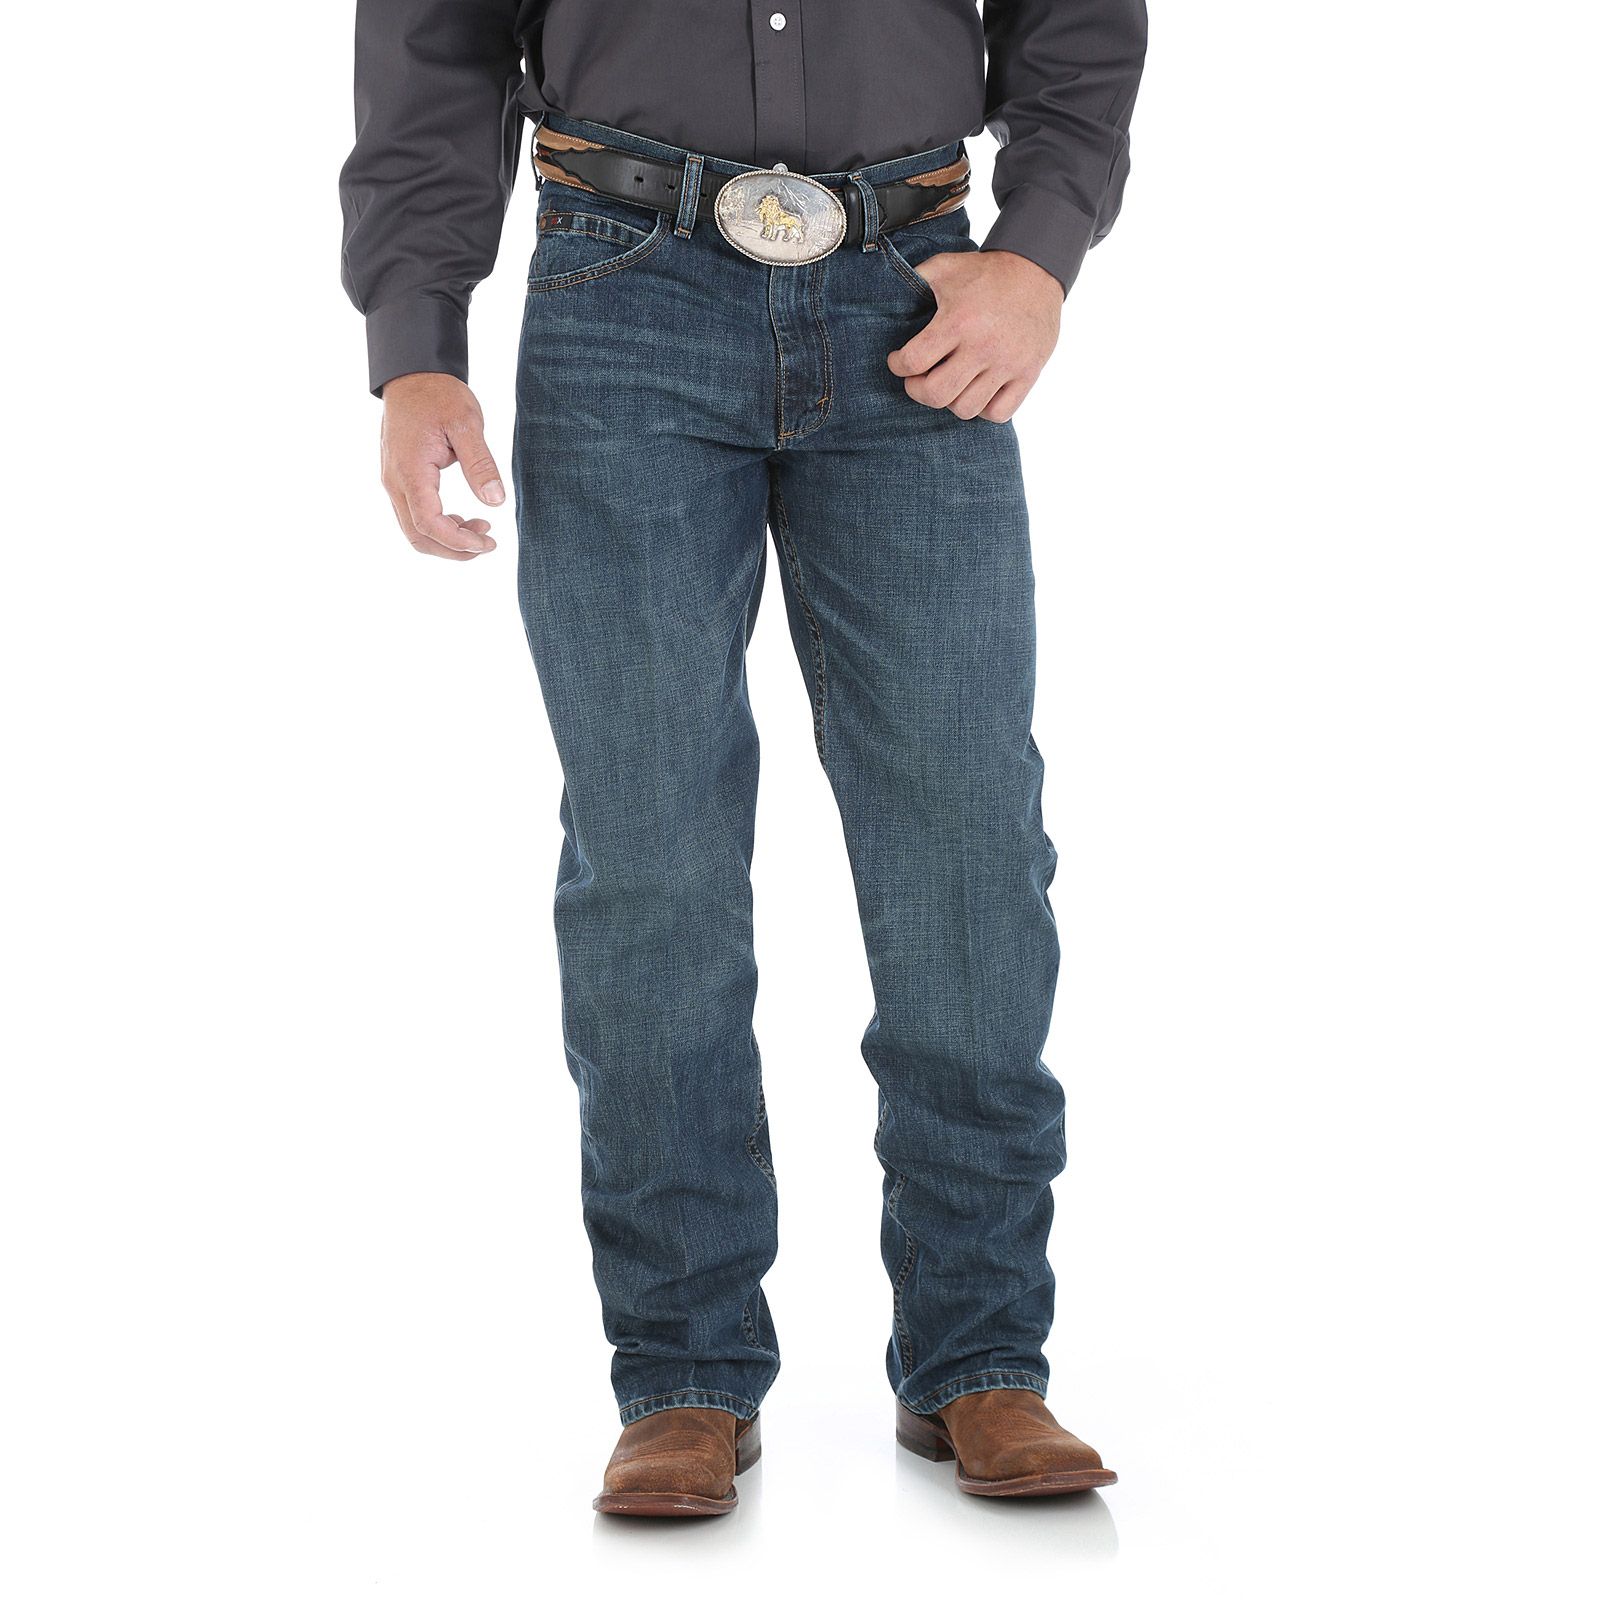 wrangler 20x 01 competition jeans